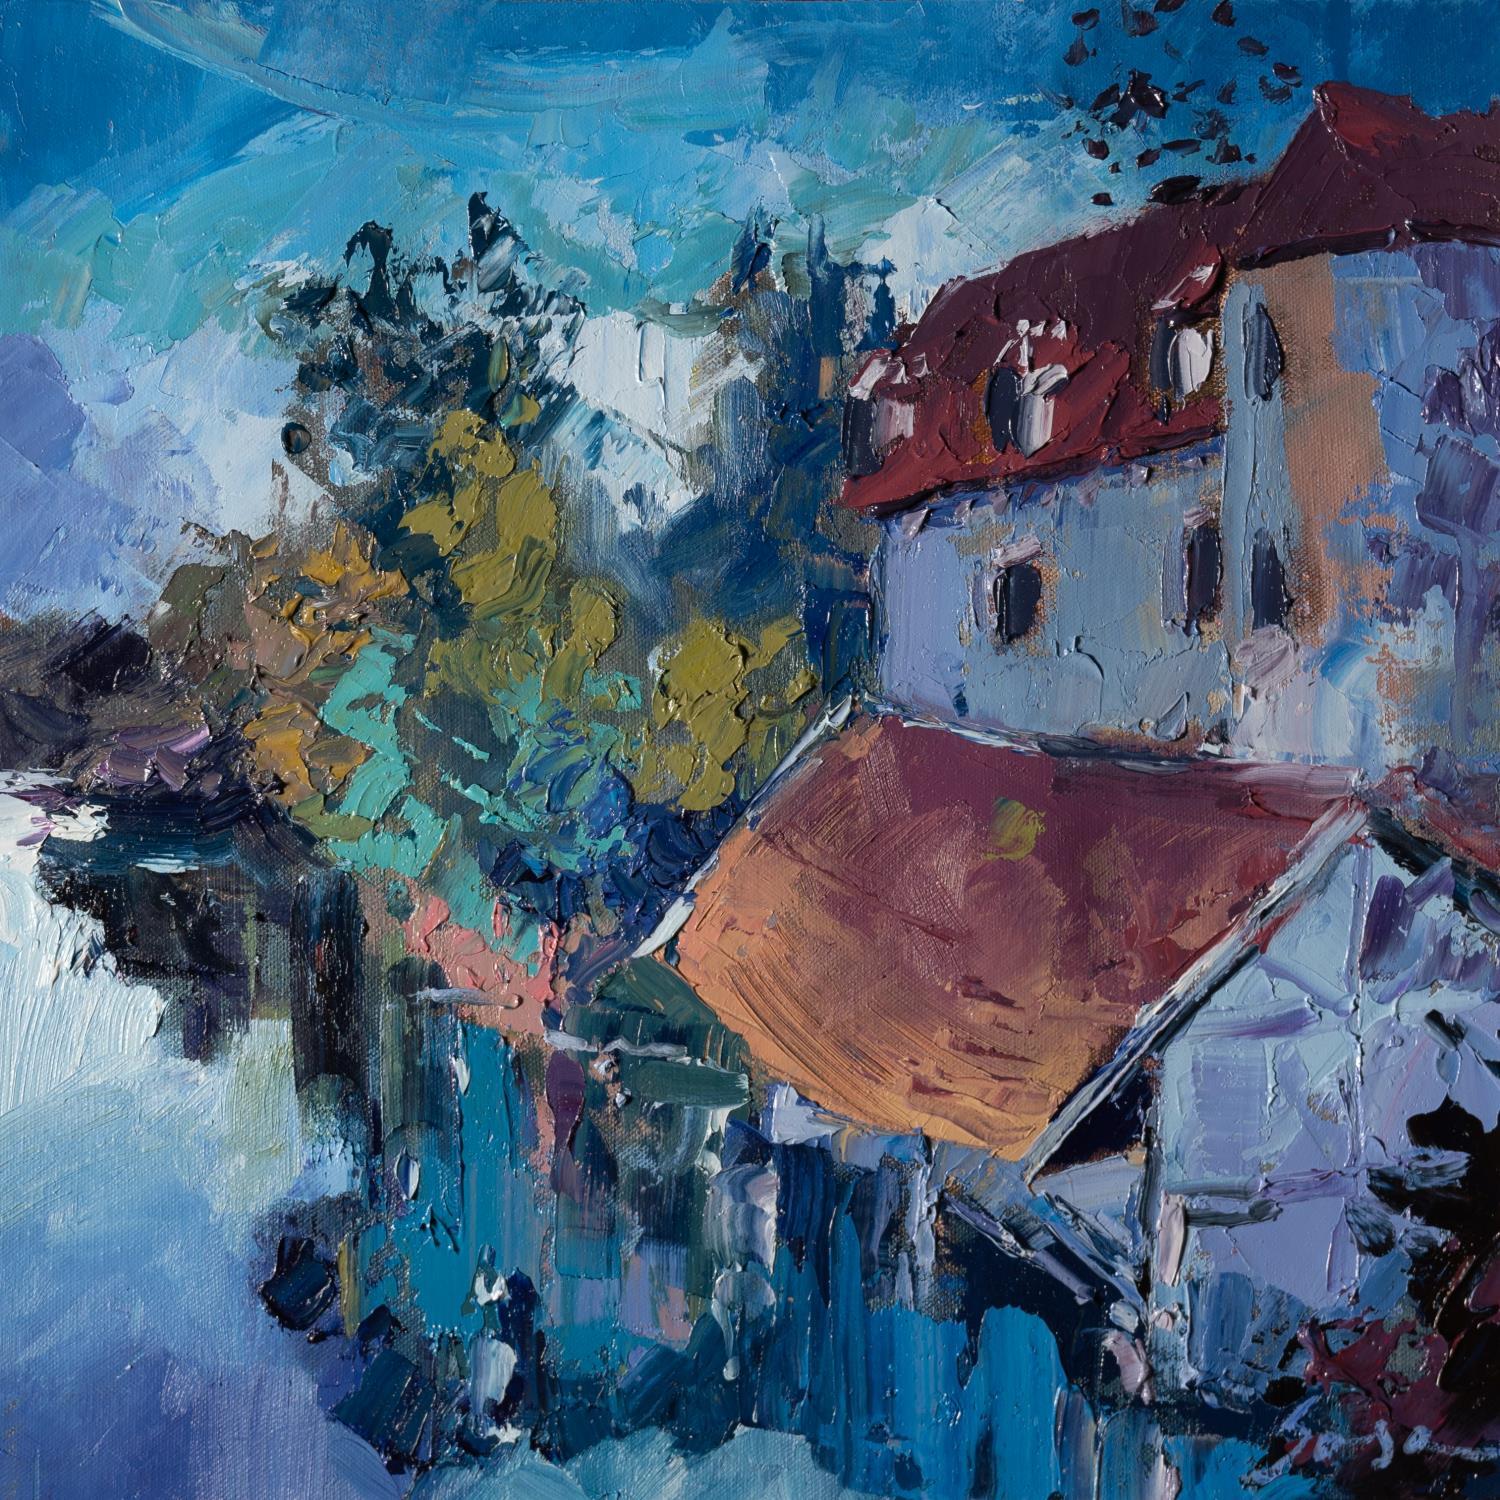 ▷ Painting A corner of Marnay-sur-seine by Fran Sosa | Carré d'artistes